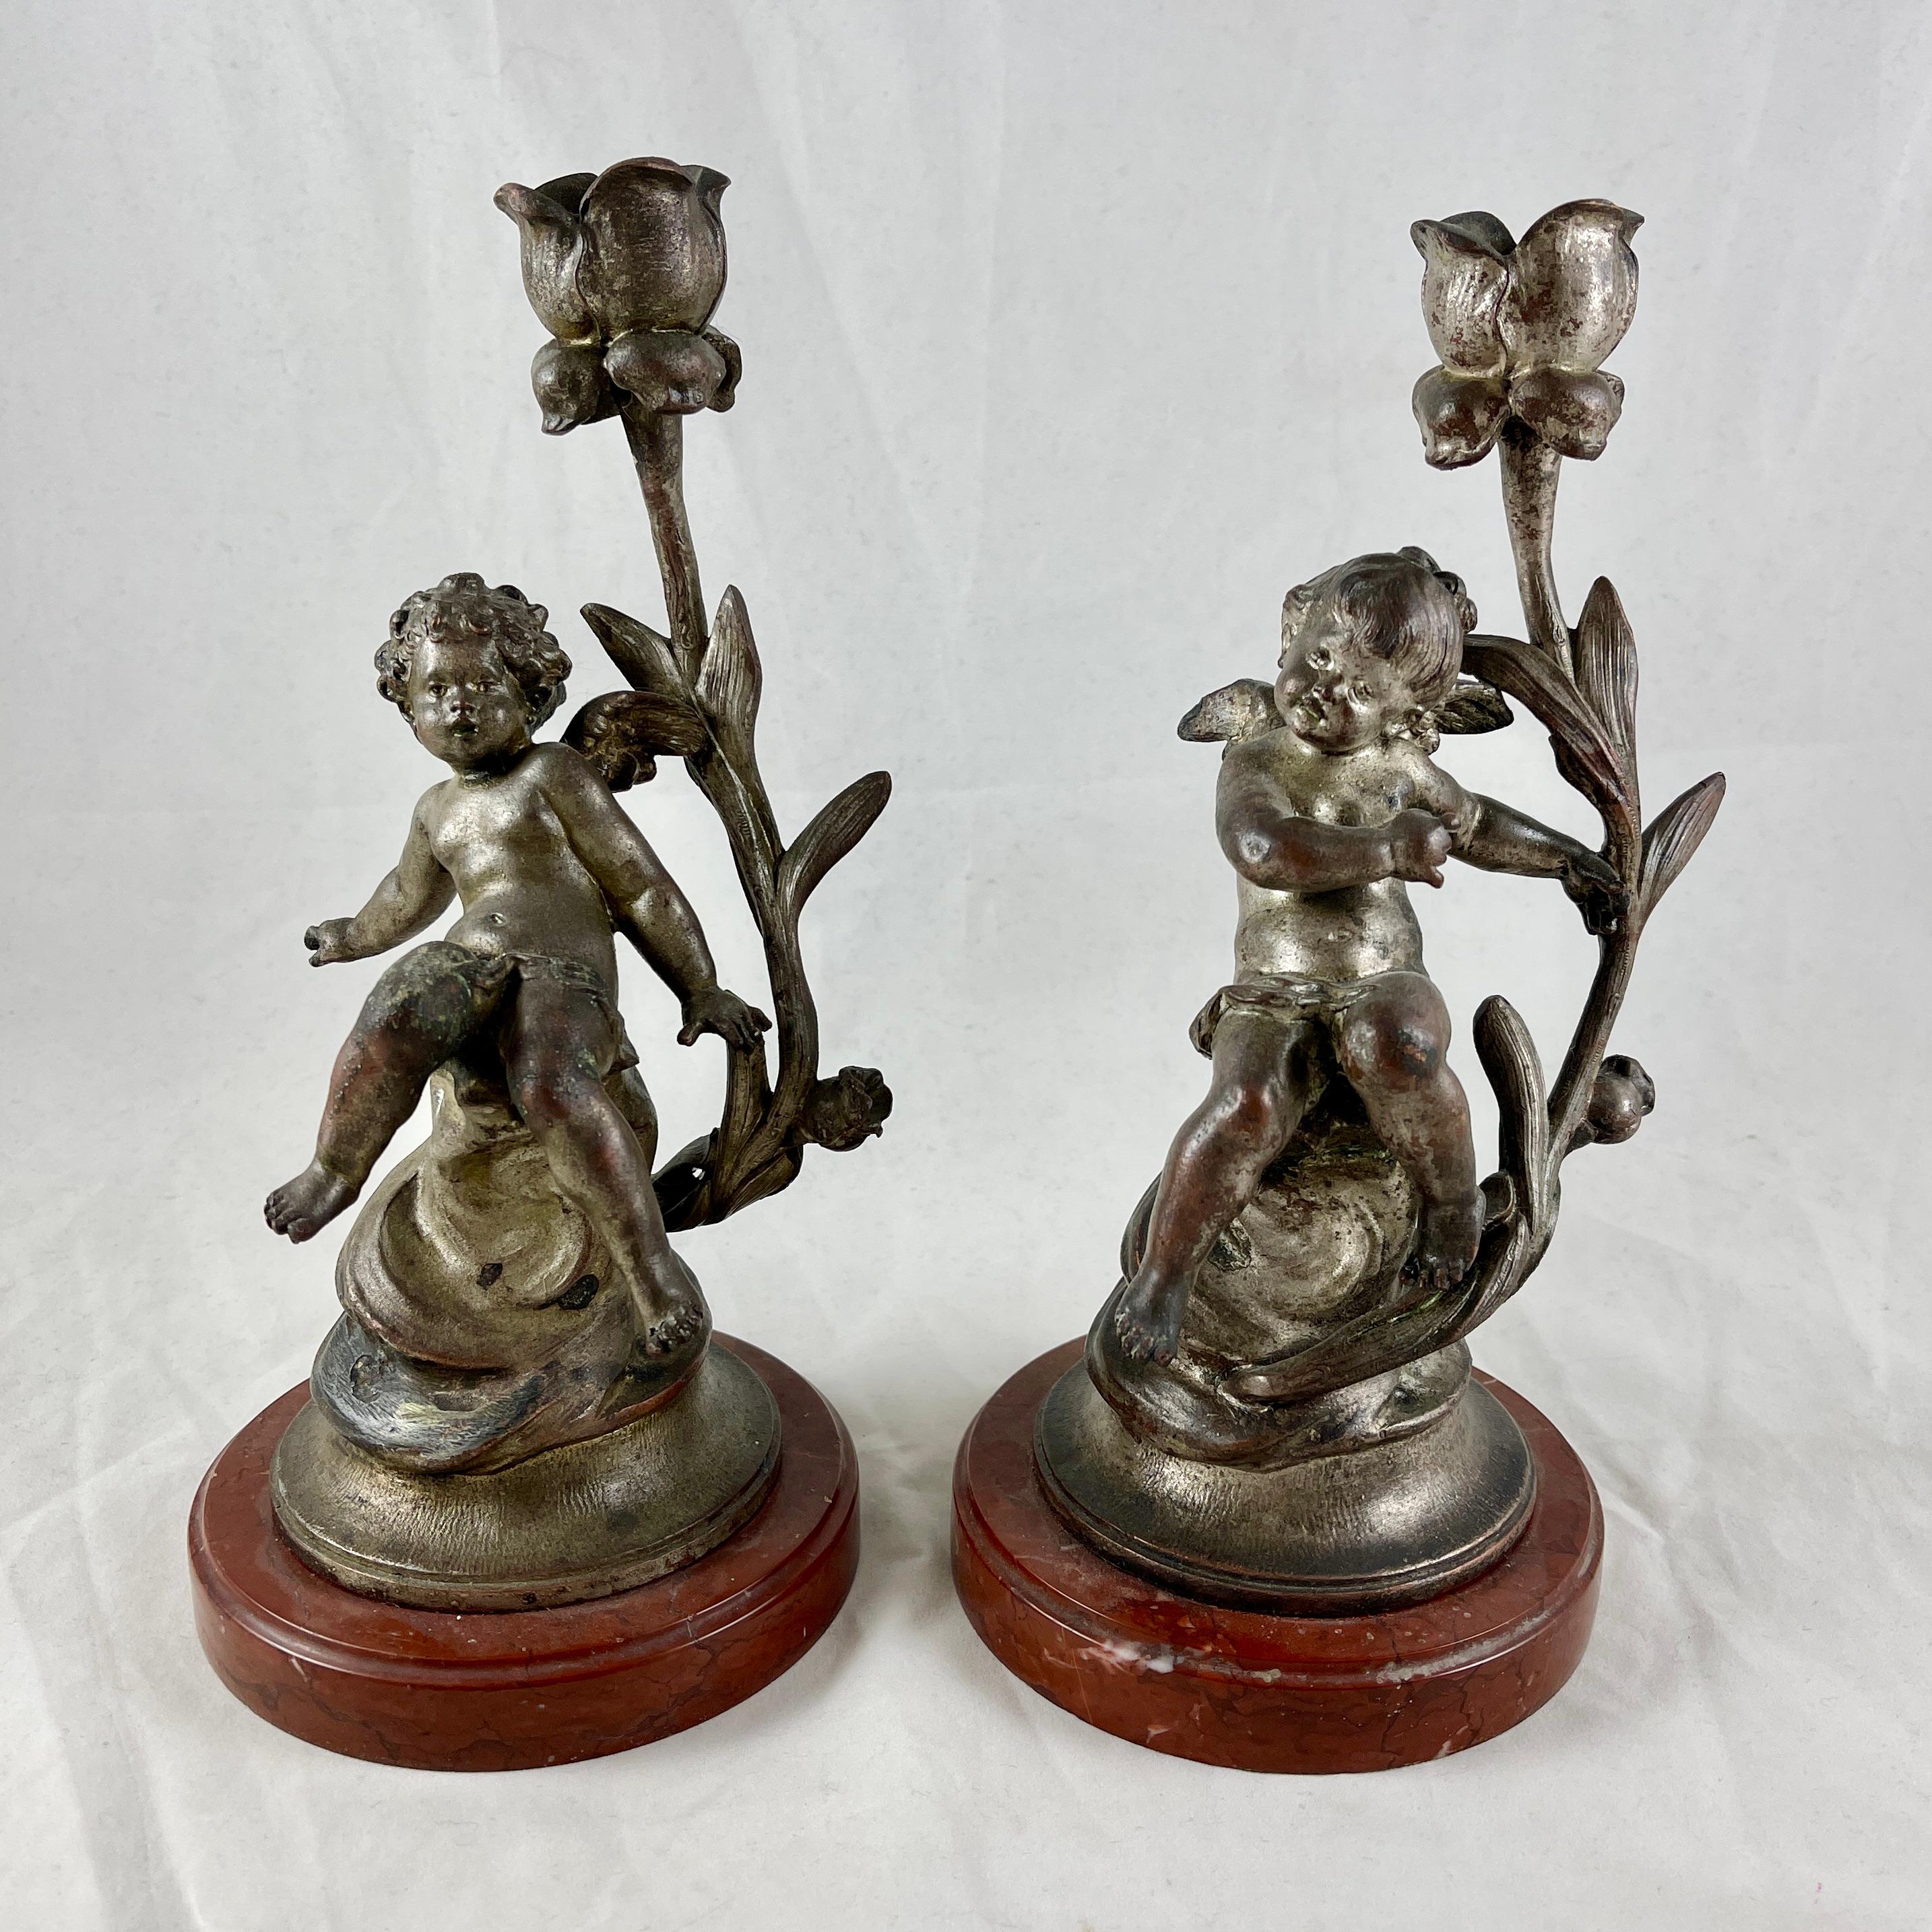 19th Century French Putti Cherub Candlesticks Signed Sylvain Kinsburger Spelter & Marble S/2 For Sale